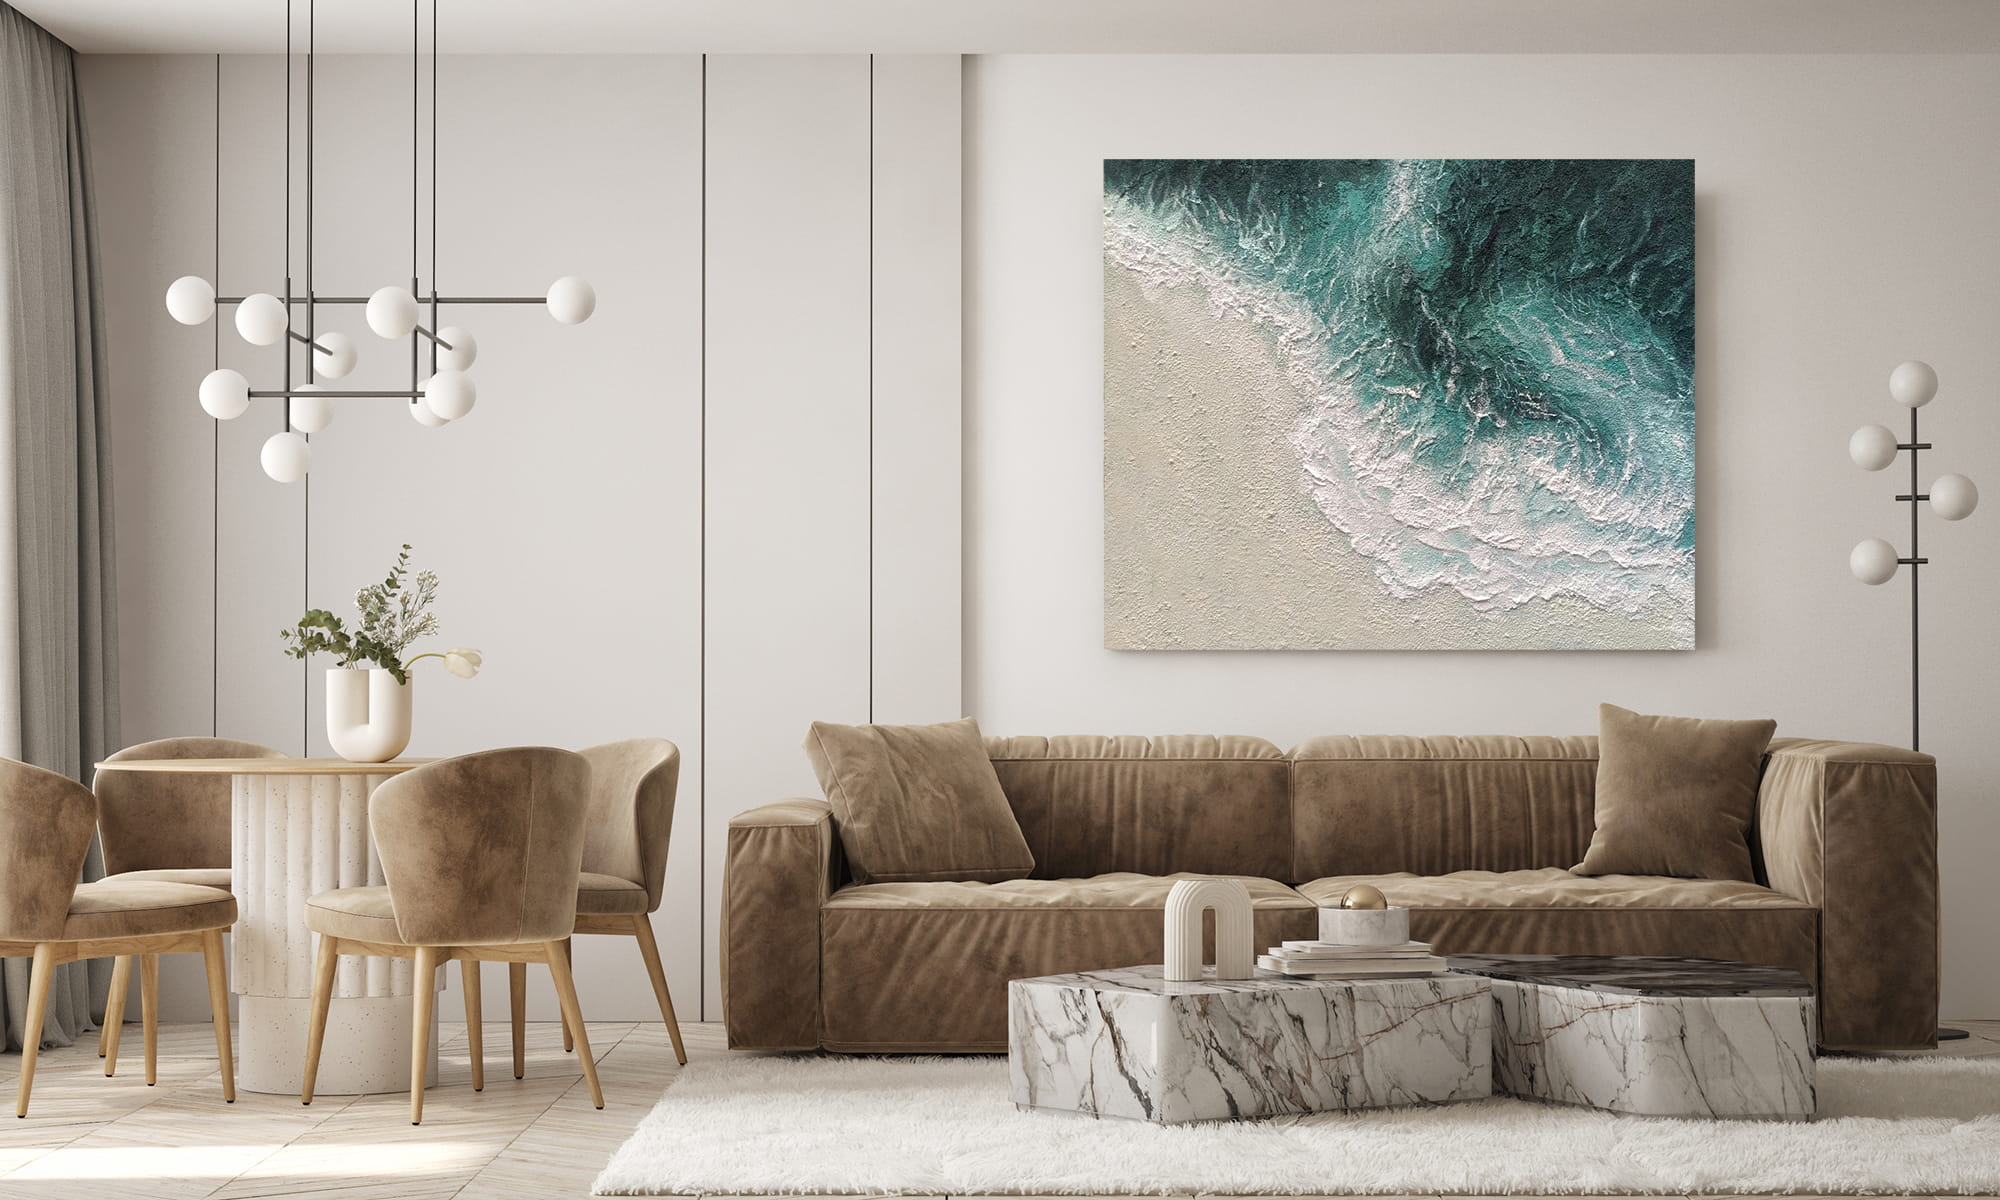 "THE SEASHORE, STYLE A: Exquisite hand-painted, high-quality and premium Landscape shaped textured wall art painting hanging on the living room wall."